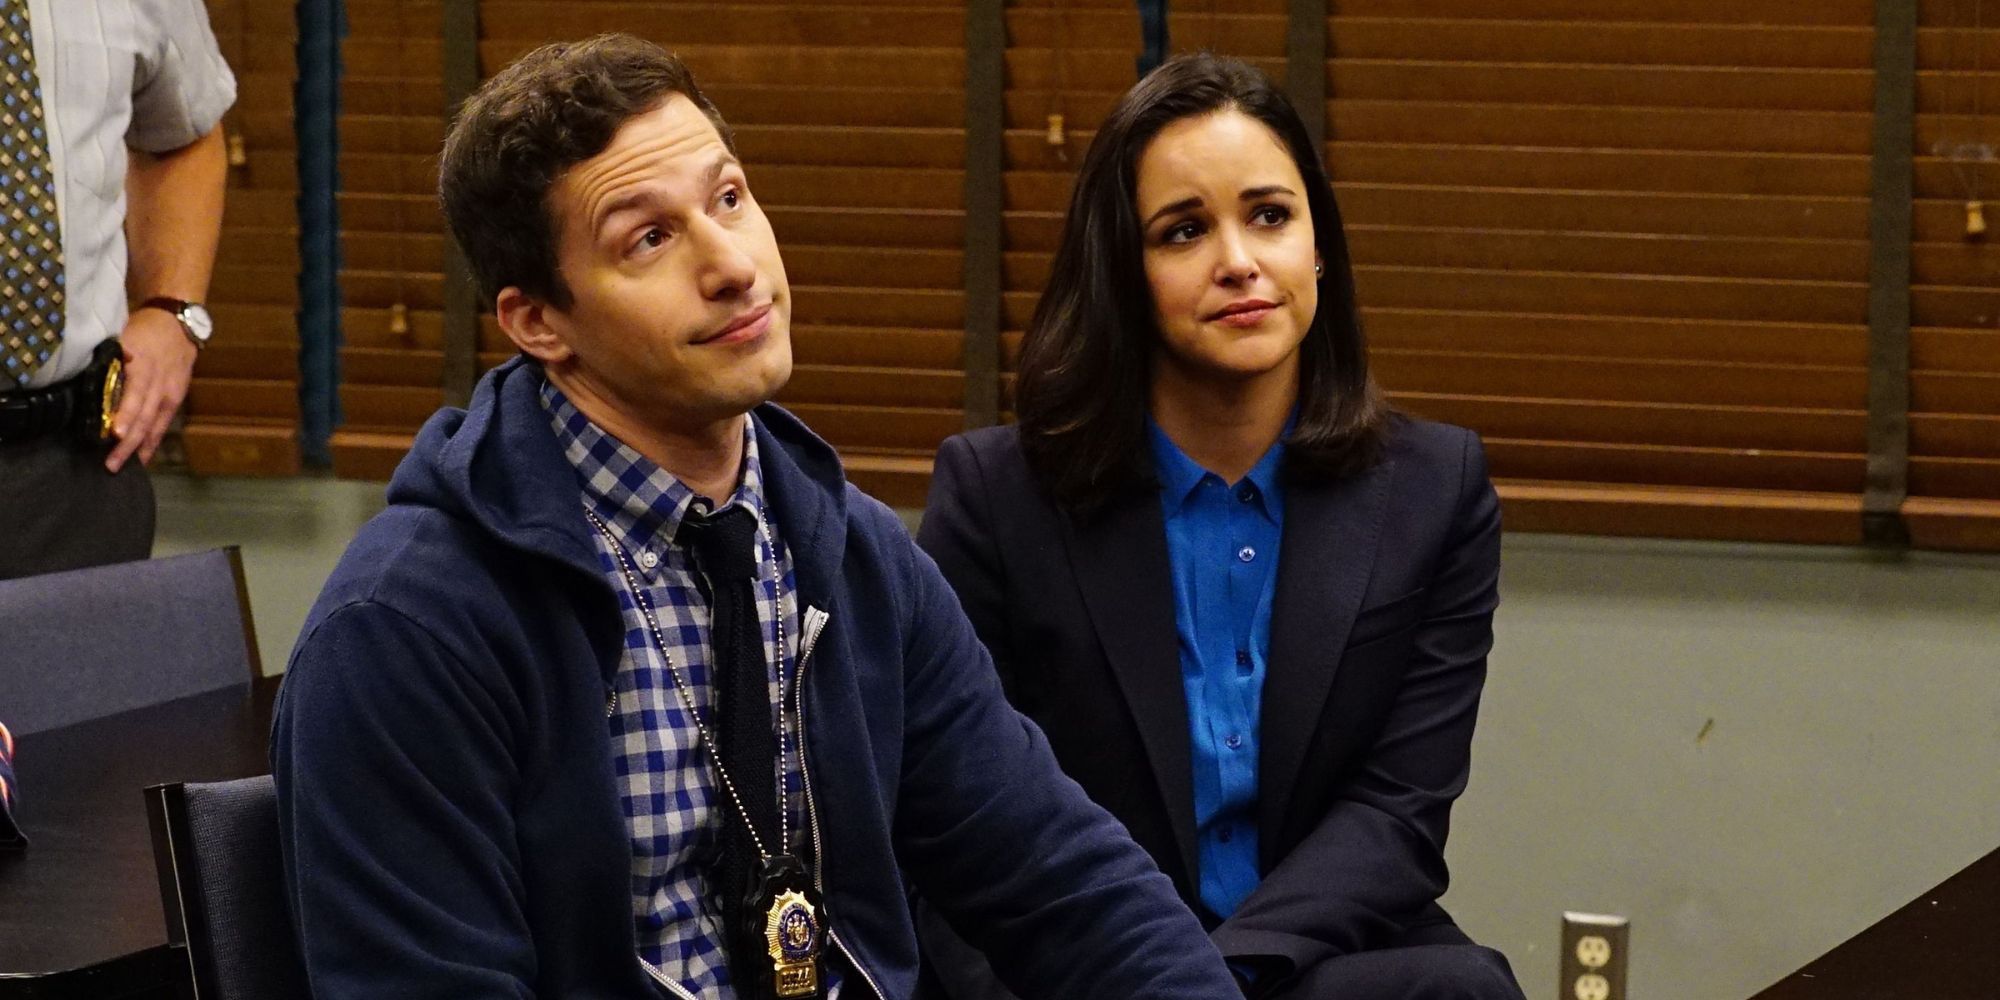 Jake and Amy from Brooklyn Nine-Nine sitting together